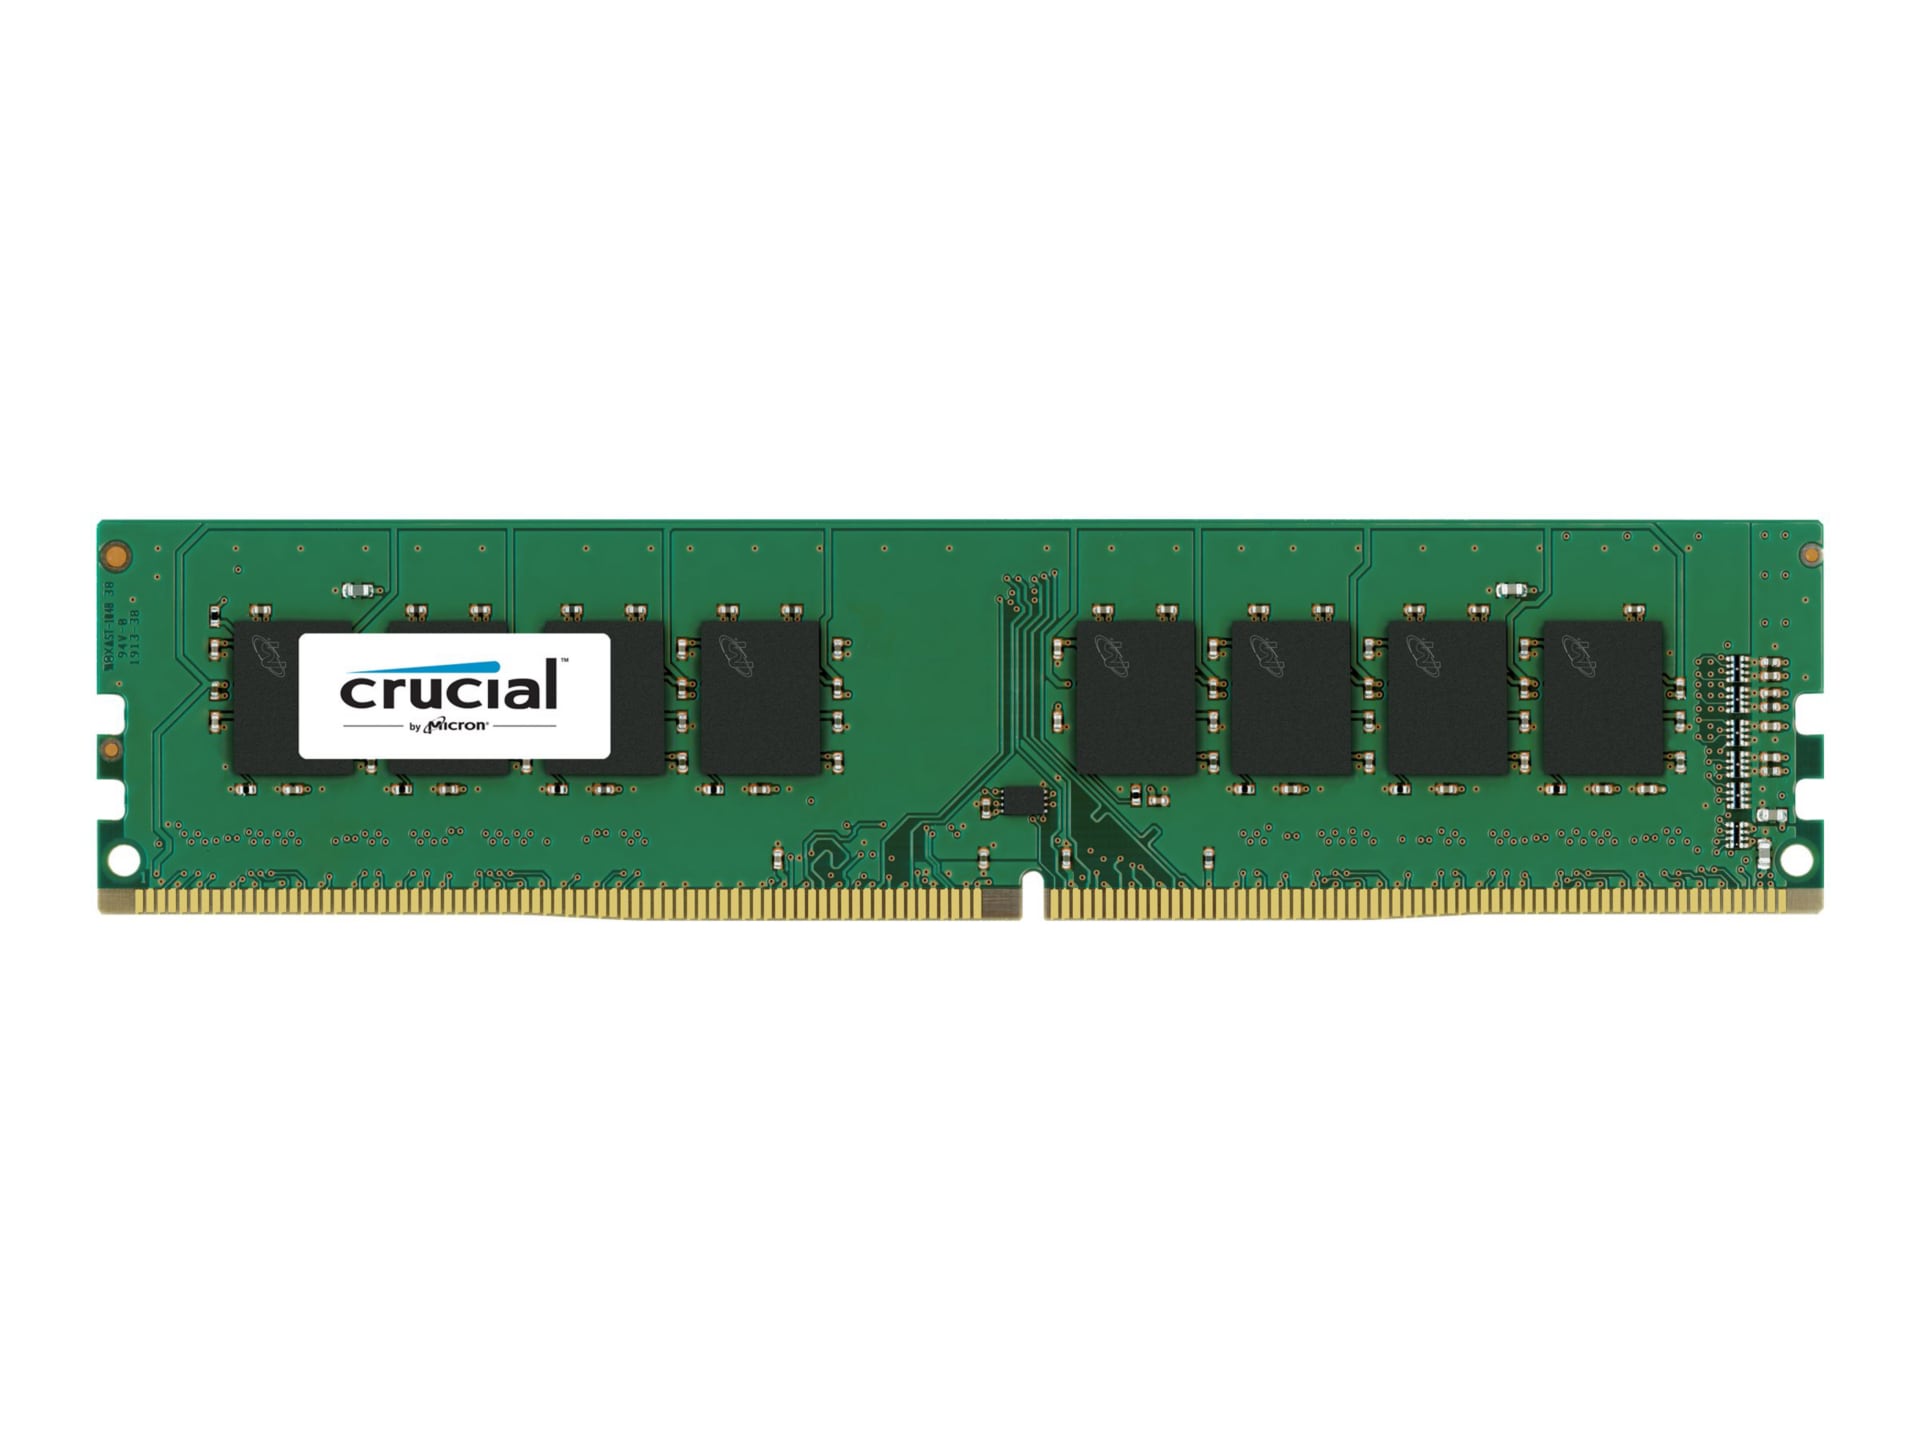 Crucial - DDR4 GB 8 - - Computer 288-pin / - DIMM unbuffered 2400 module Memory MHz - - CT8G4DFS824A - - PC4-19200